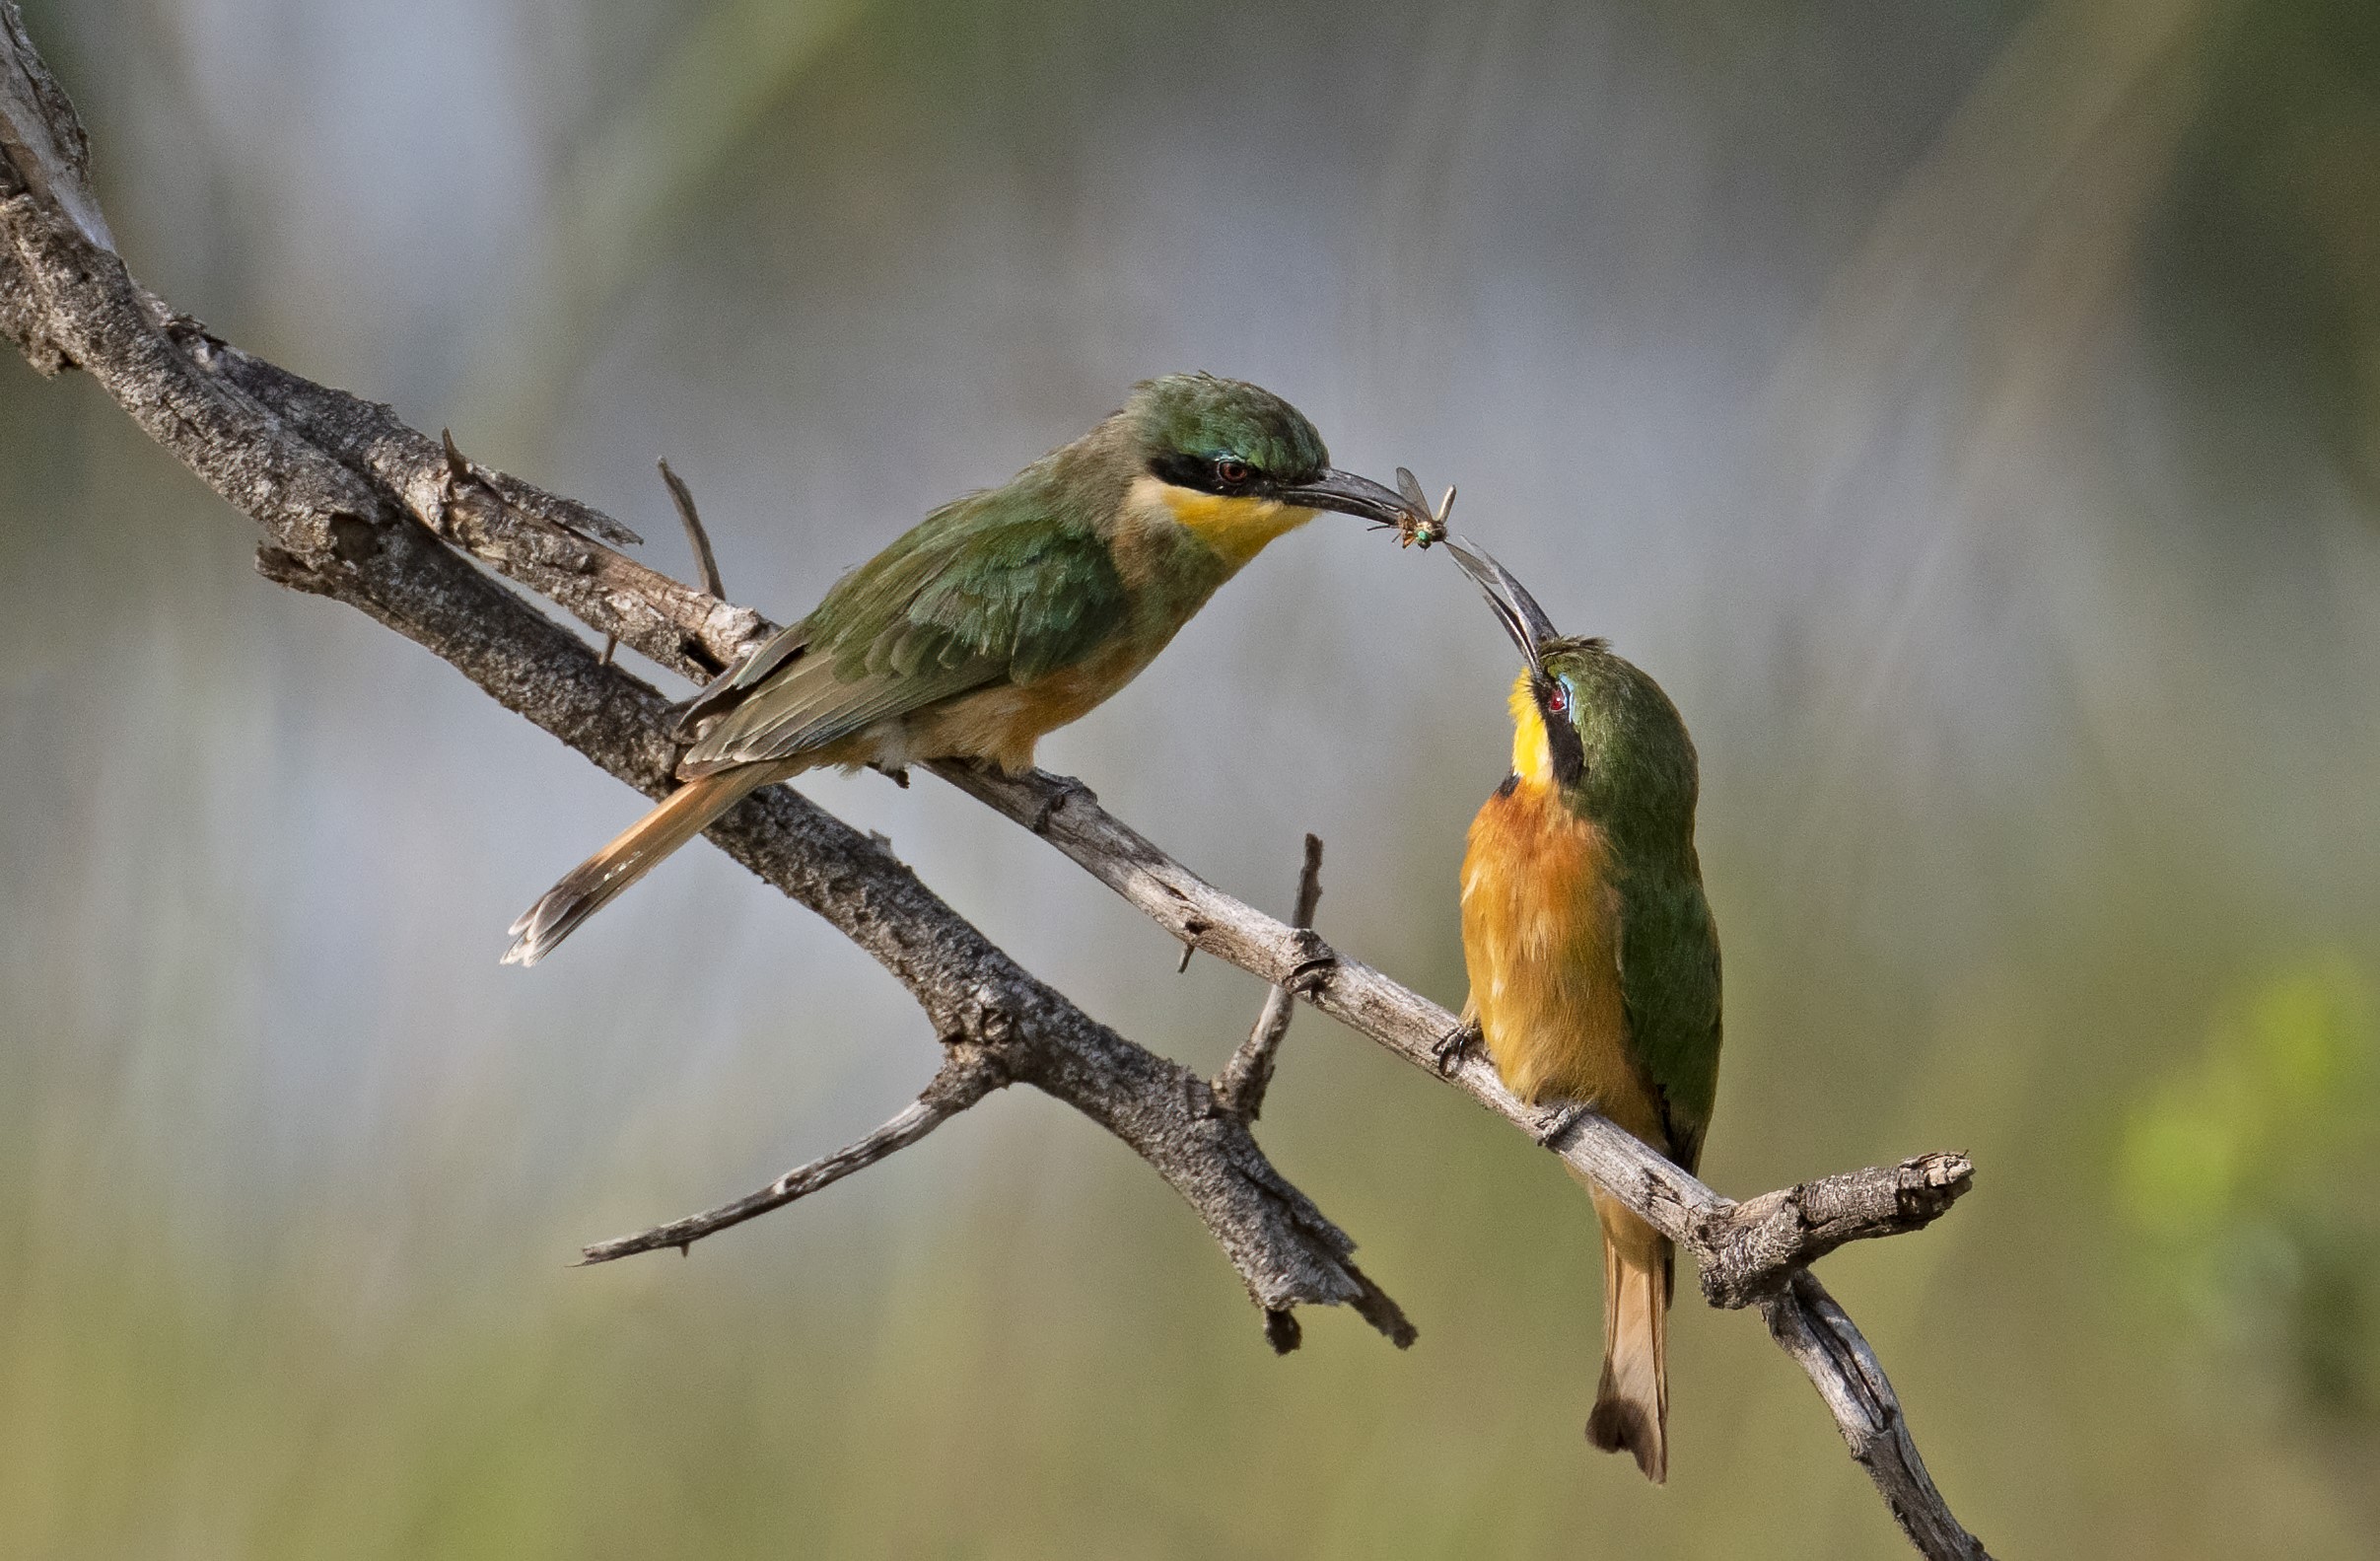 One green and yellow bird feeds another a bug